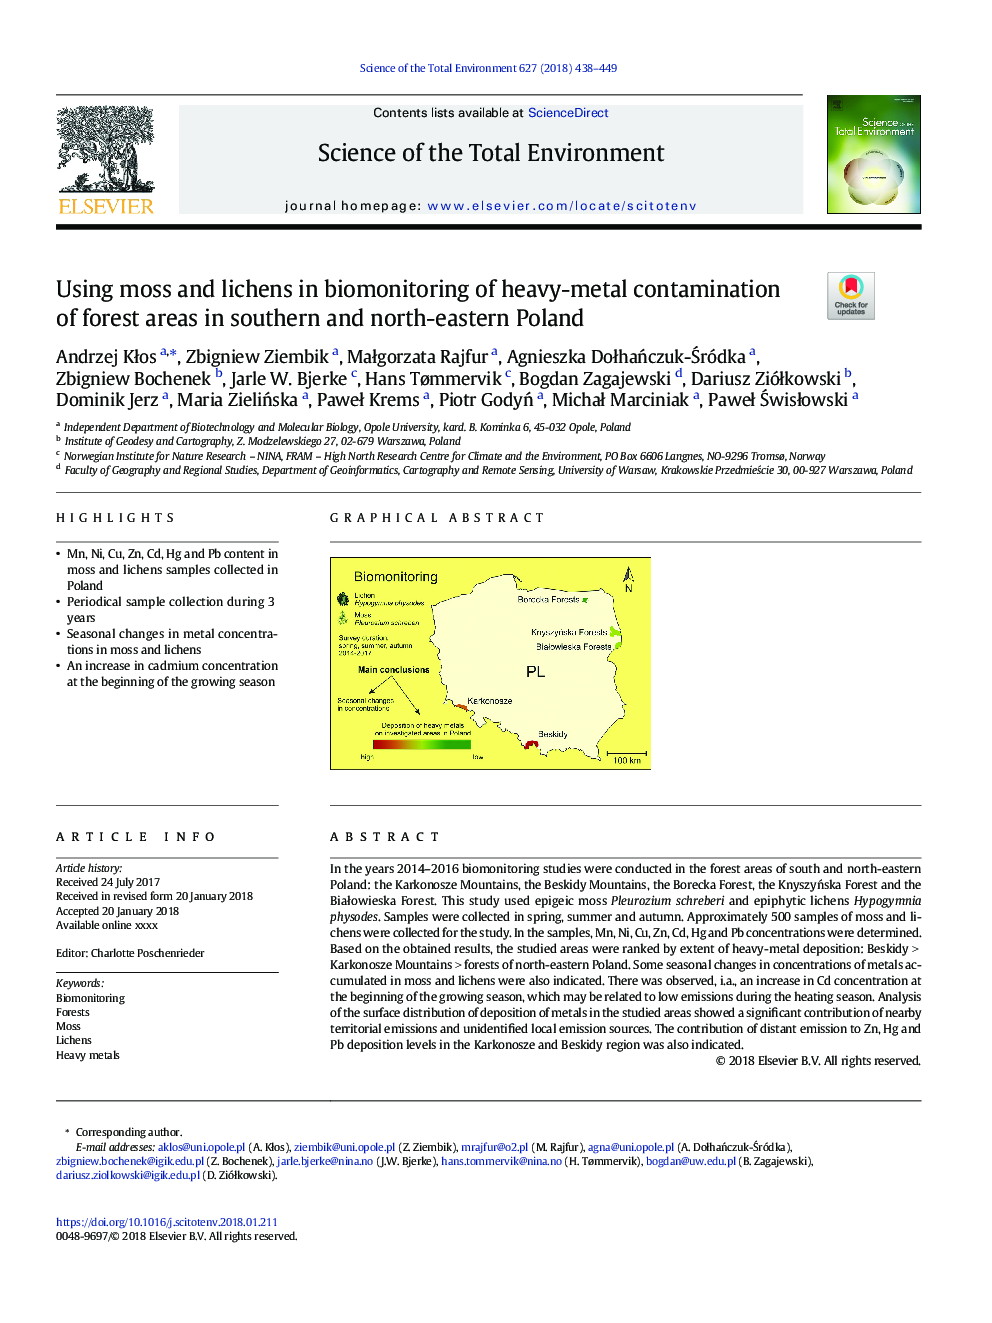 Using moss and lichens in biomonitoring of heavy-metal contamination of forest areas in southern and north-eastern Poland